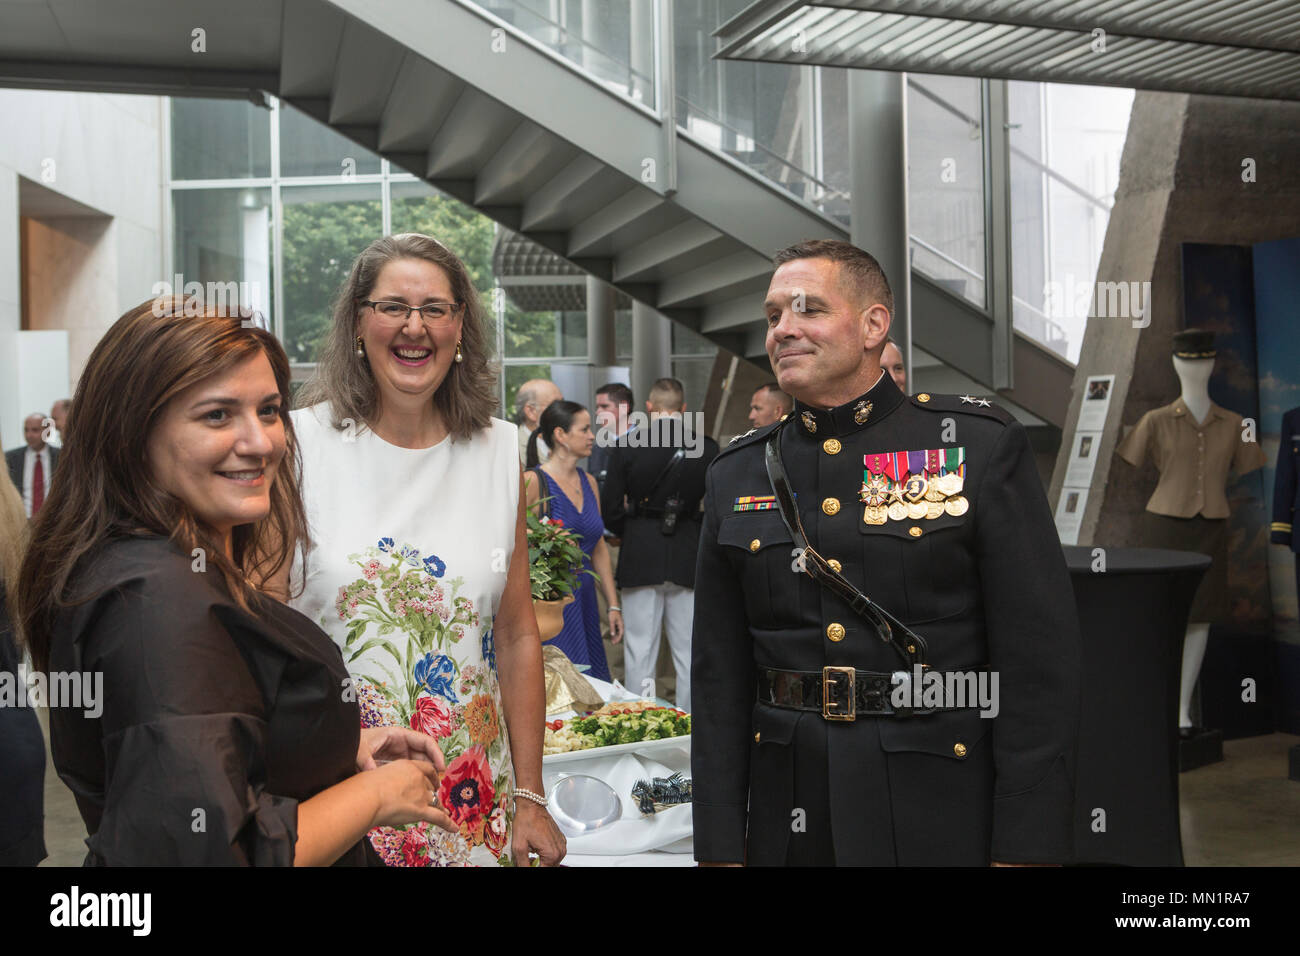 U.S. Marine Corps Maj Gen. John R. Ewers Jr., staff judge advocate to the Commandant, speaks with guests during a sunset parade reception at the Women in Military Service for America Memorial, Arlington, Virginia, Aug 1, 2017. Sunset parades are held as a means of honoring senior officials, distinguished citizens and supporters of the Marine Corps. (U.S. Marine Corps photo by Lance Cpl. Stephon L. McRae) Stock Photo